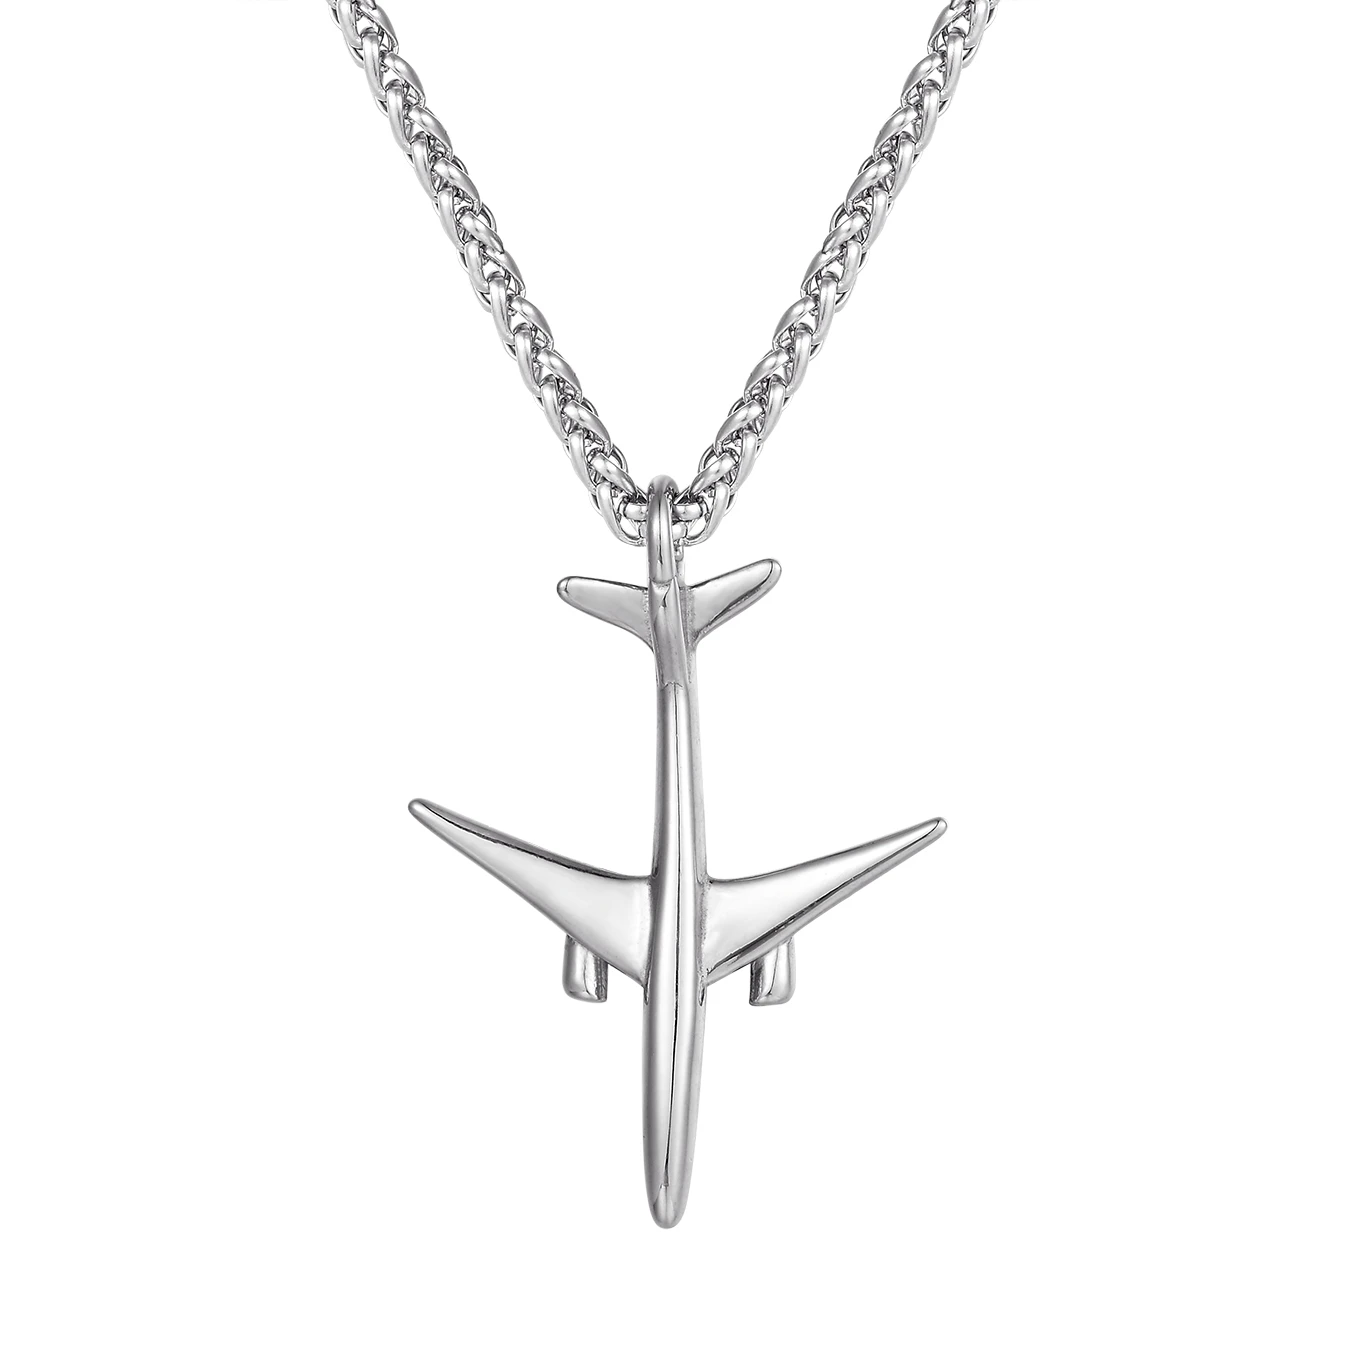 Punk Men s Fashion Airplane Pendant Male Custom stainless steel Long Chain Aircraft Necklace Women Jewelry